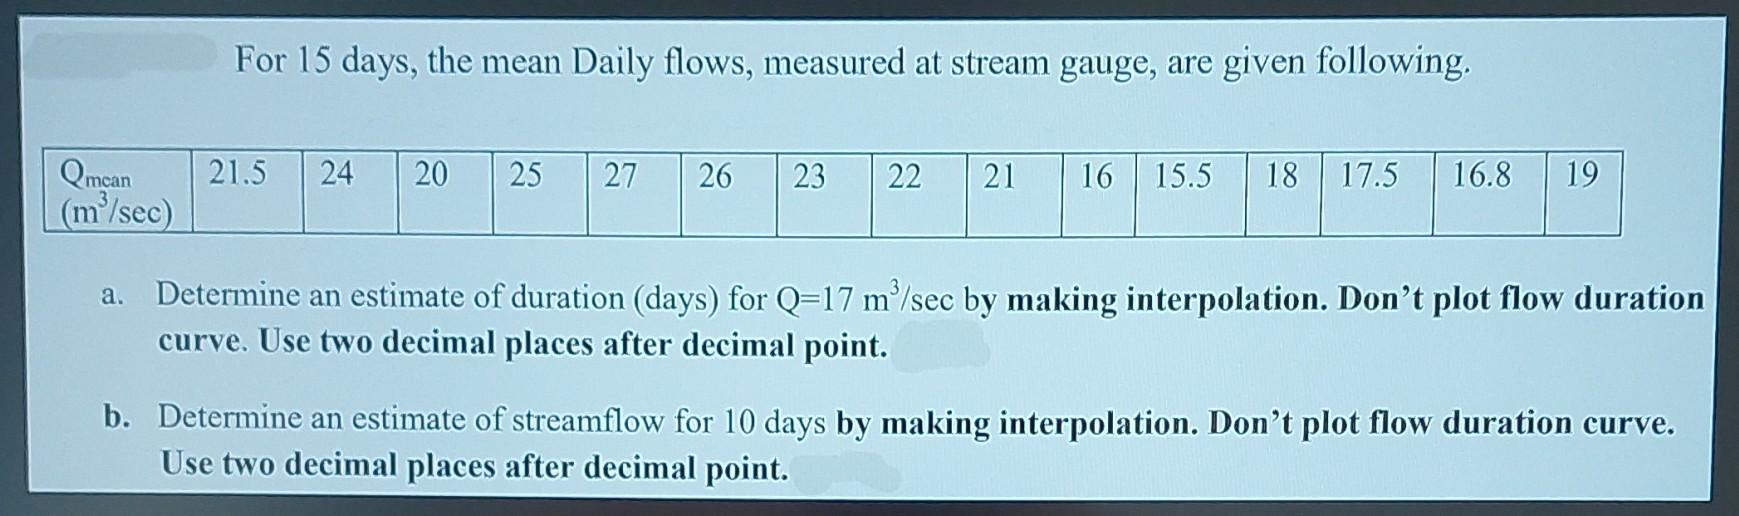 Solved For 15 days, the mean Daily flows, measured at stream